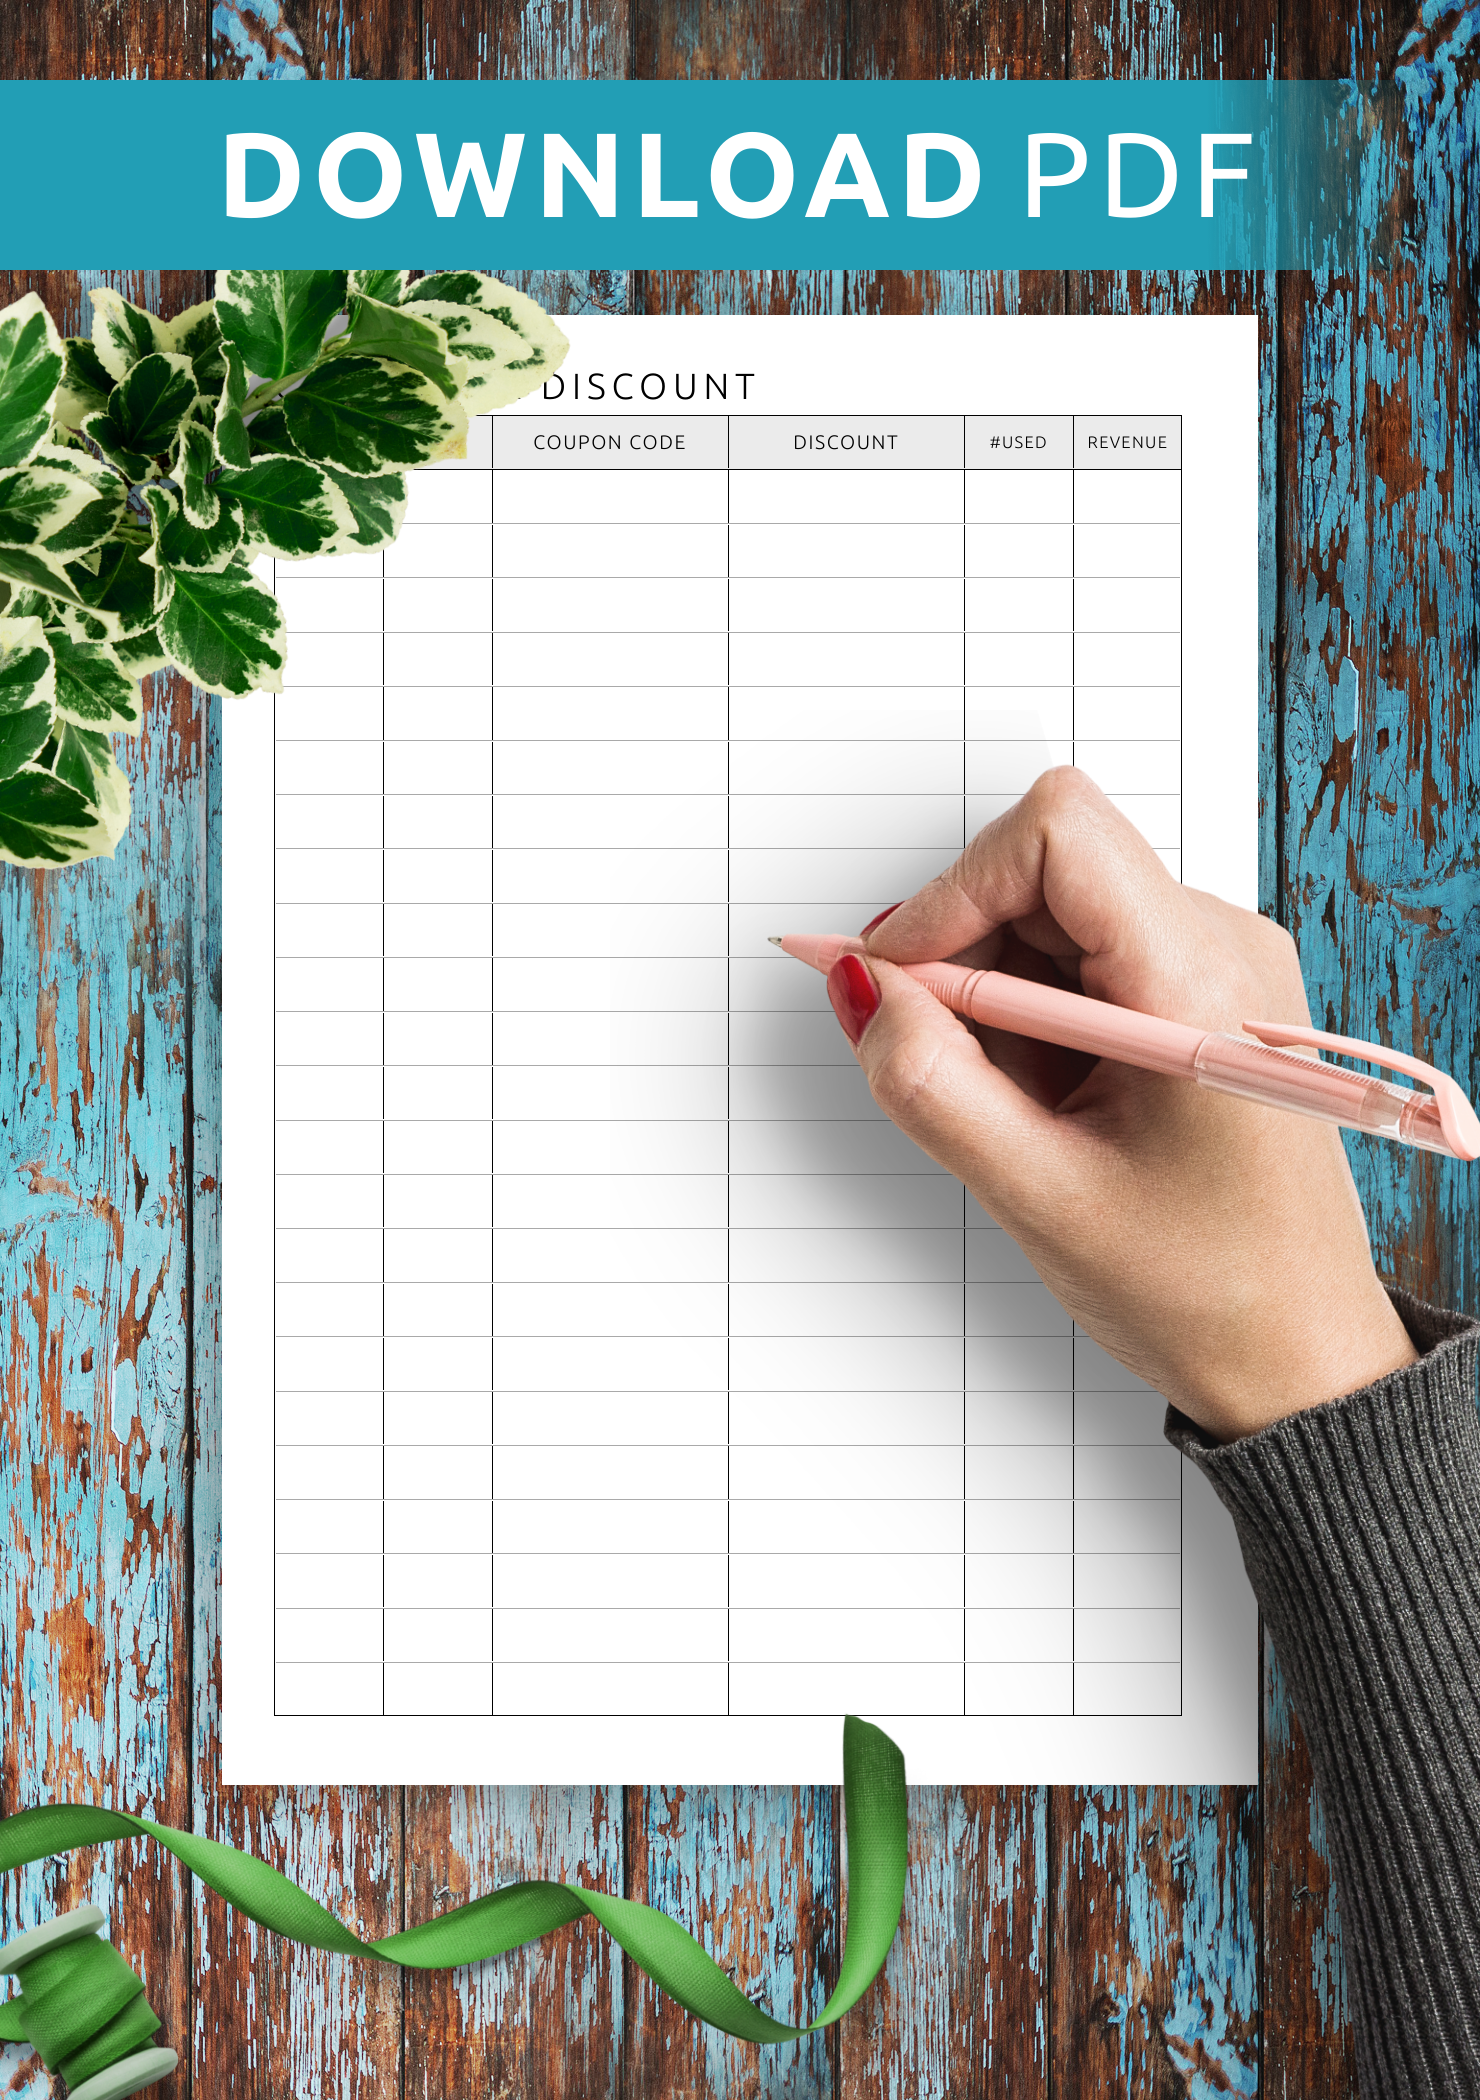 Personal, Coupon Codes Tracker Printable Shopping Discount Code Log  Template, Sale Checklist, Store Coupon Code Organizer, Discount Tracker 